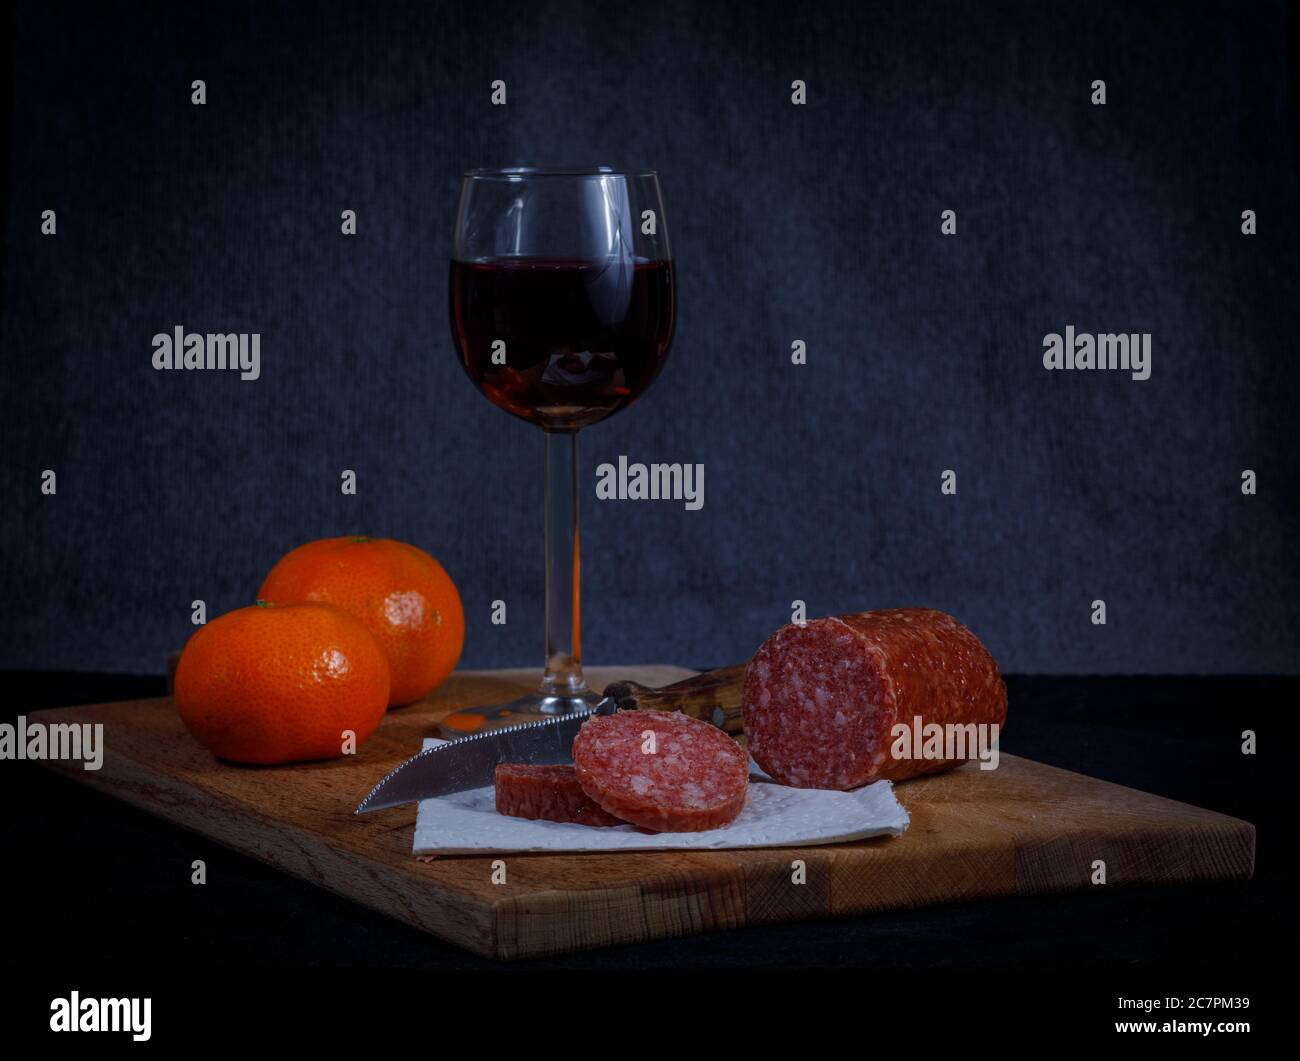 rib gazon zelf Breadboard with a sliced meat saucage, knife and a glas of wine against a  dark background. For color and extra vitamines the mandarins are added  Stock Photo - Alamy